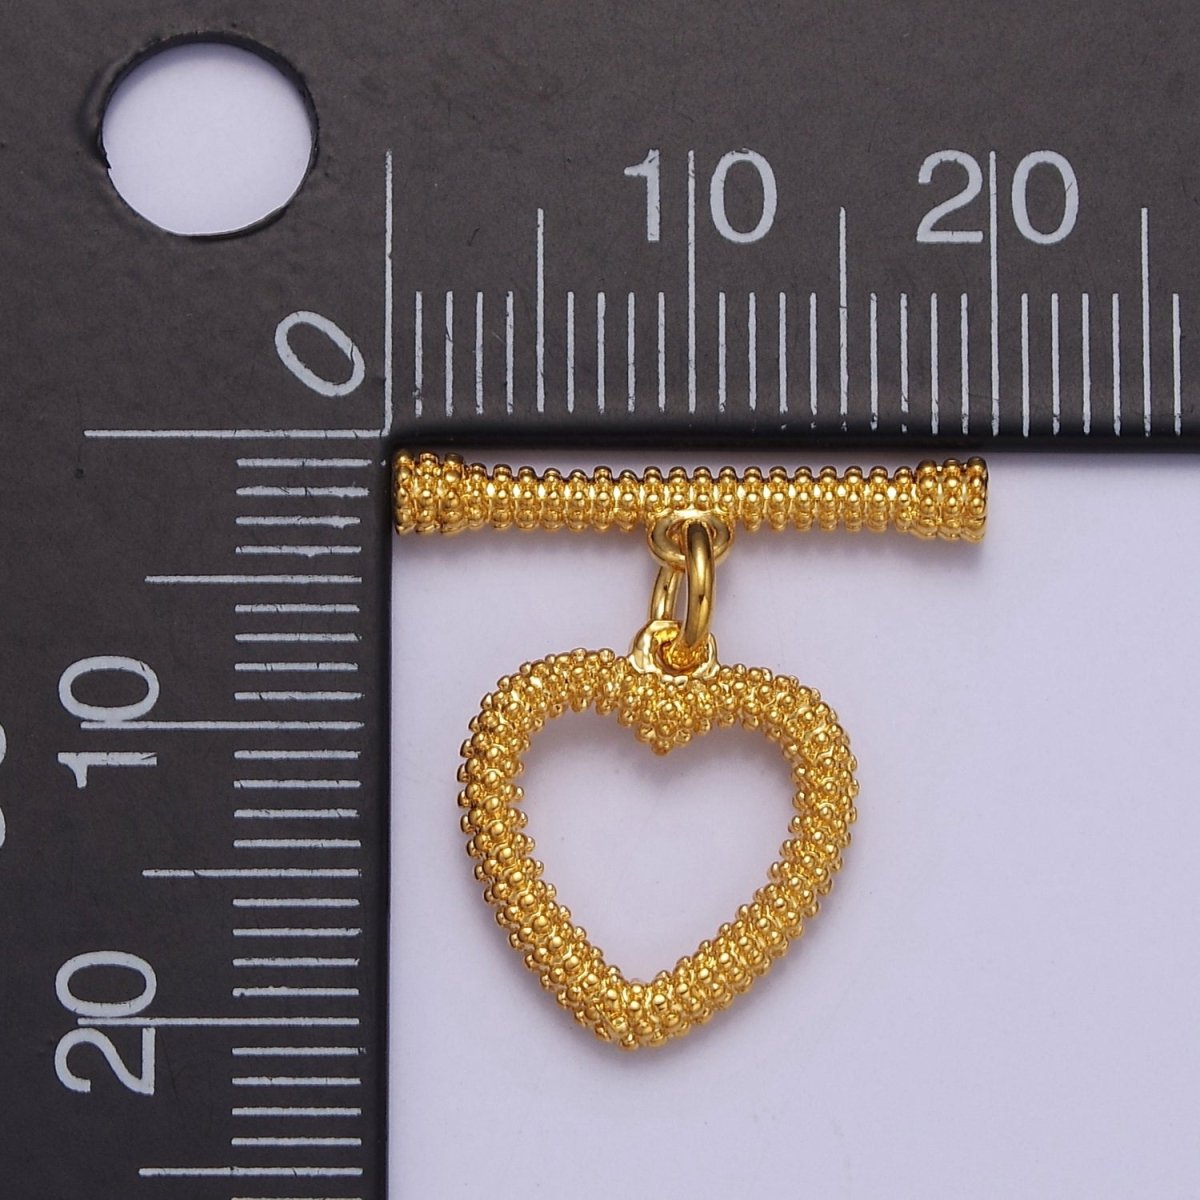 Heart Toggle Clasp Connector, 24k Gold Filled Toggle Clasp, Jewelry End Clasp for Bracelet, Necklace Closure L-644 L-682 L-683 - DLUXCA